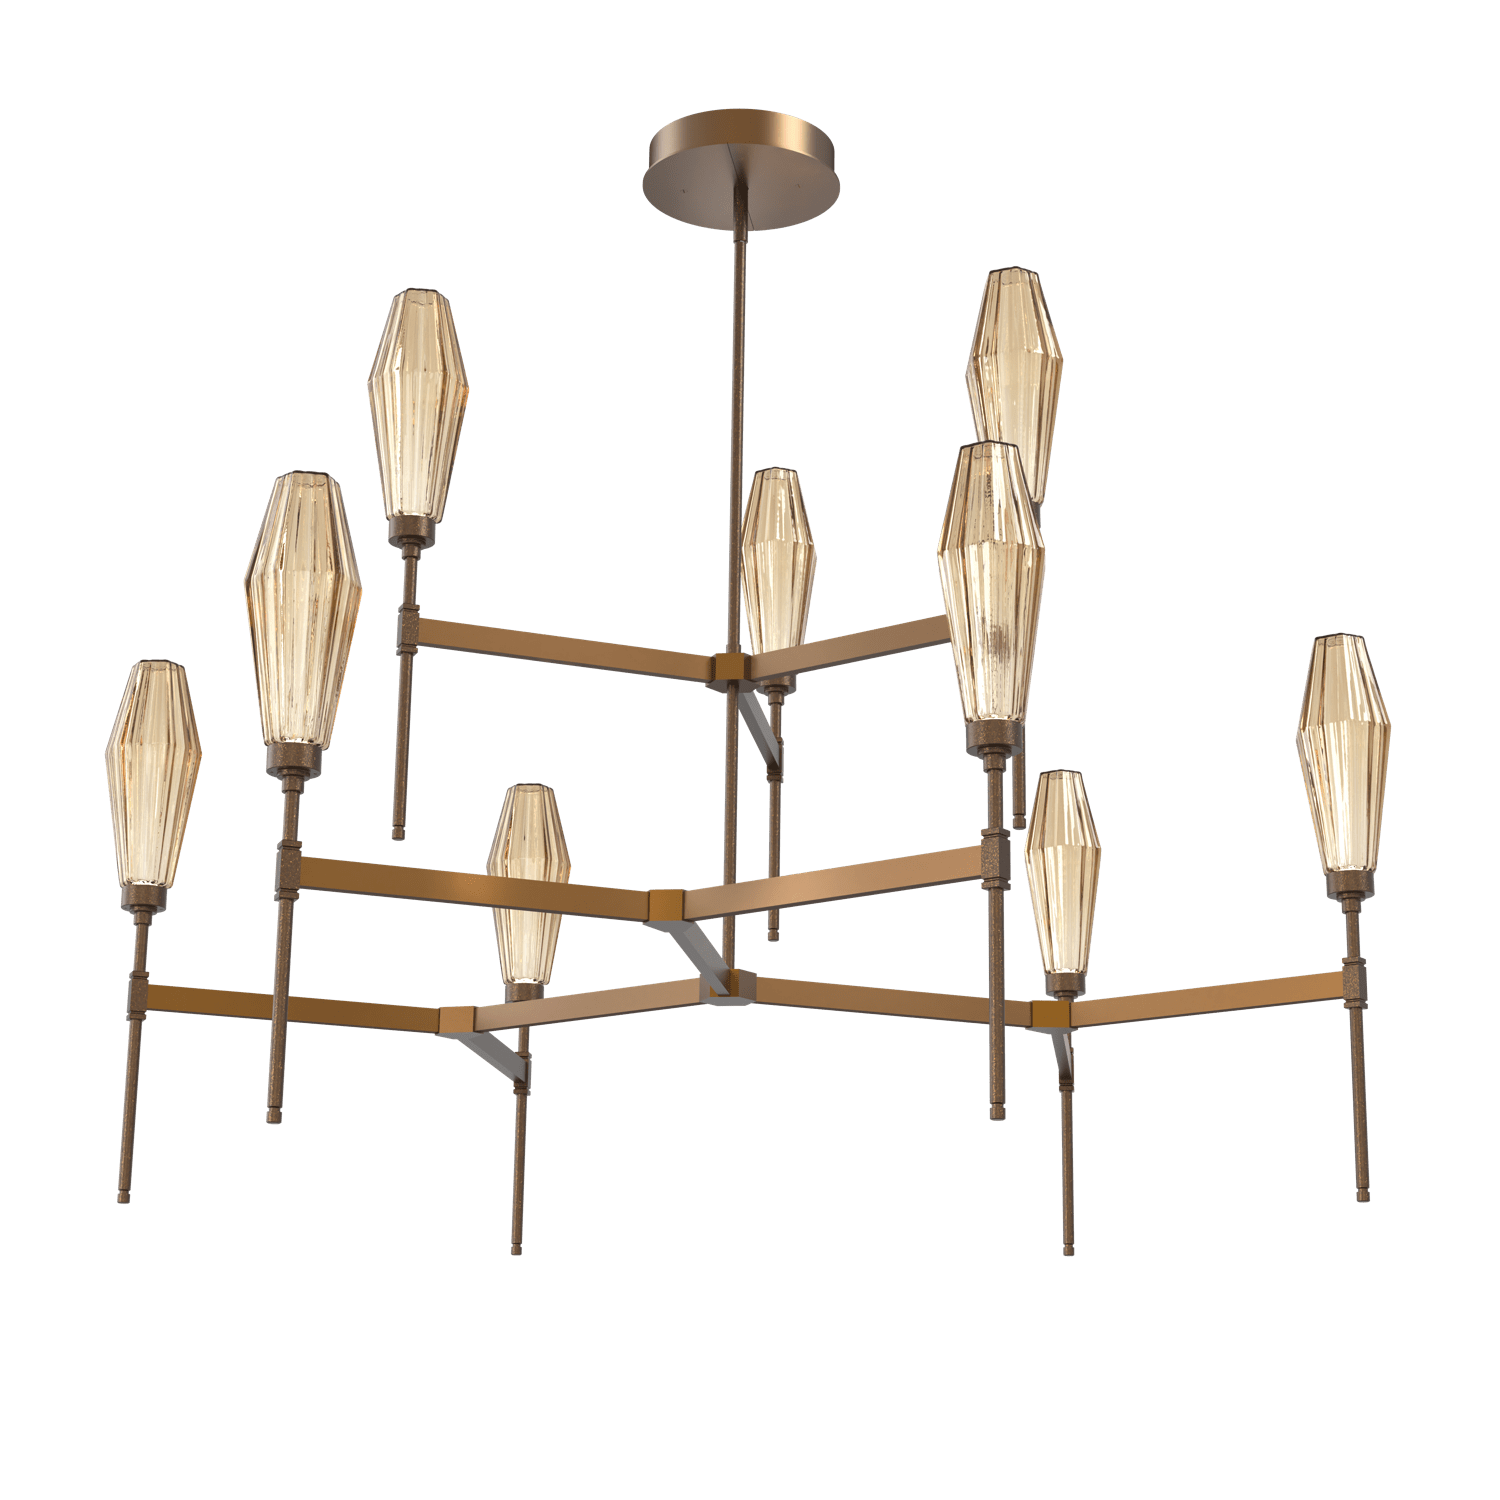 CHB0049-54-FB-RB-Hammerton-Studio-Aalto-54-inch-round-two-tier-belvedere-chandelier-with-flat-bronze-finish-and-optic-ribbed-bronze-glass-shades-and-LED-lamping